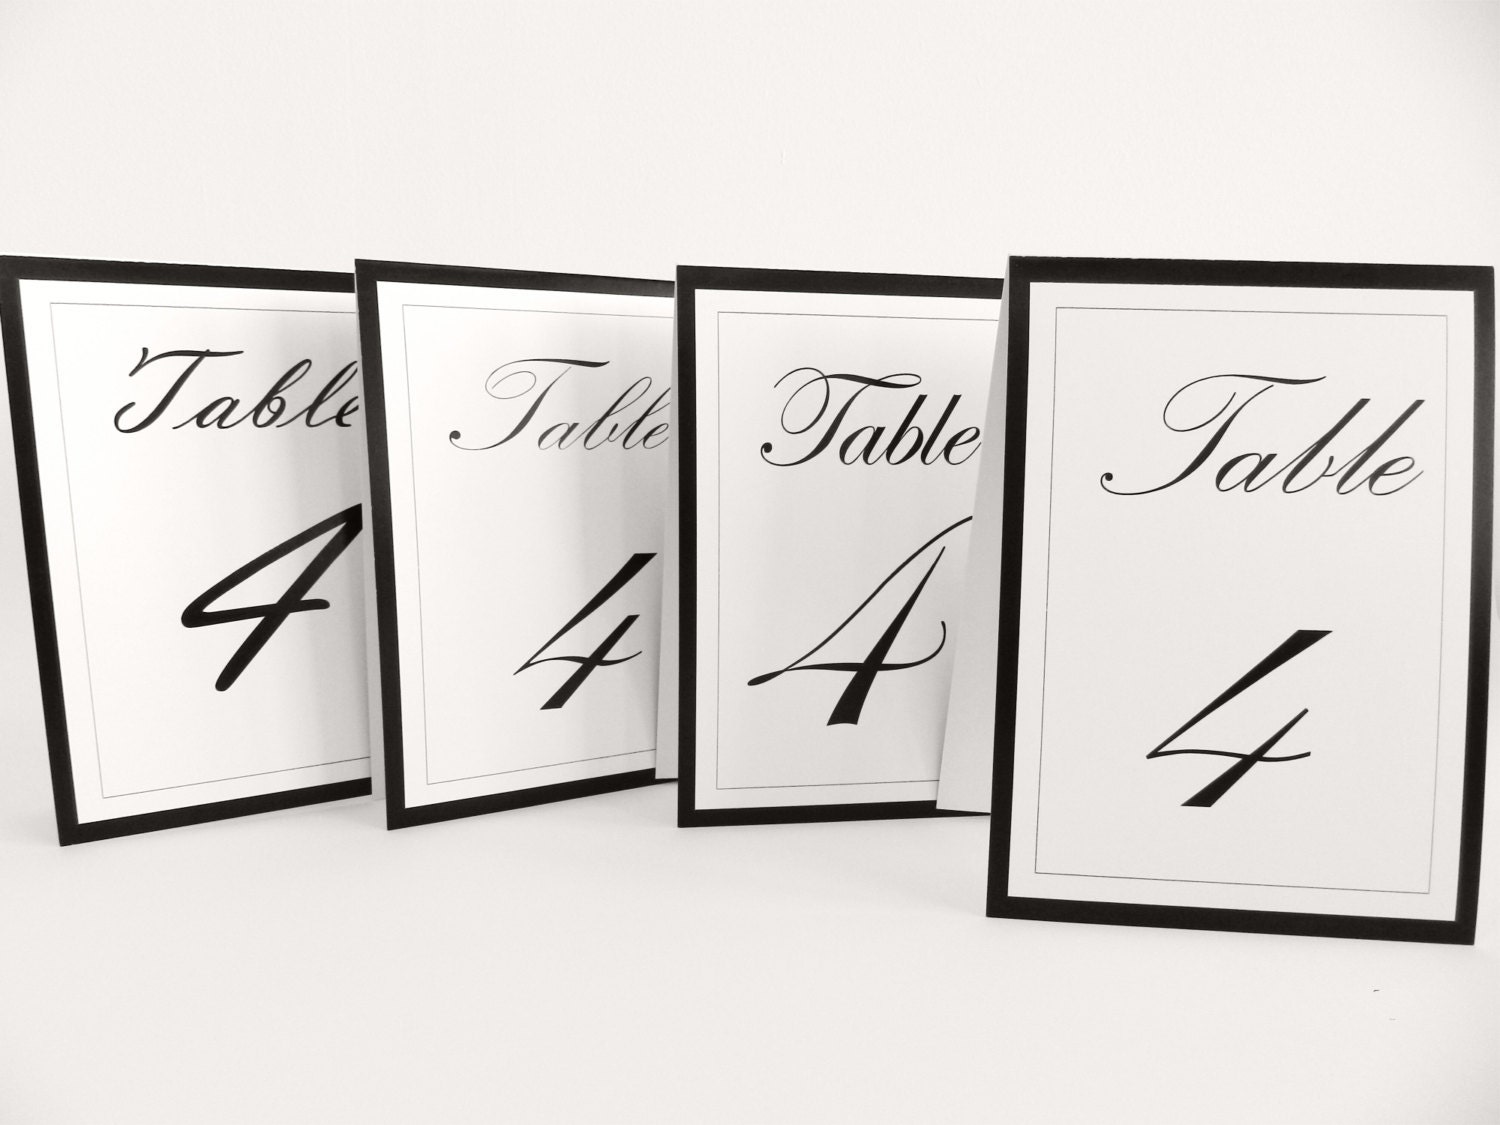 Wedding Table Numbers Tents I Classic, Edwardian black and white I 4 types of calligraphy - FunkyBoxStudio